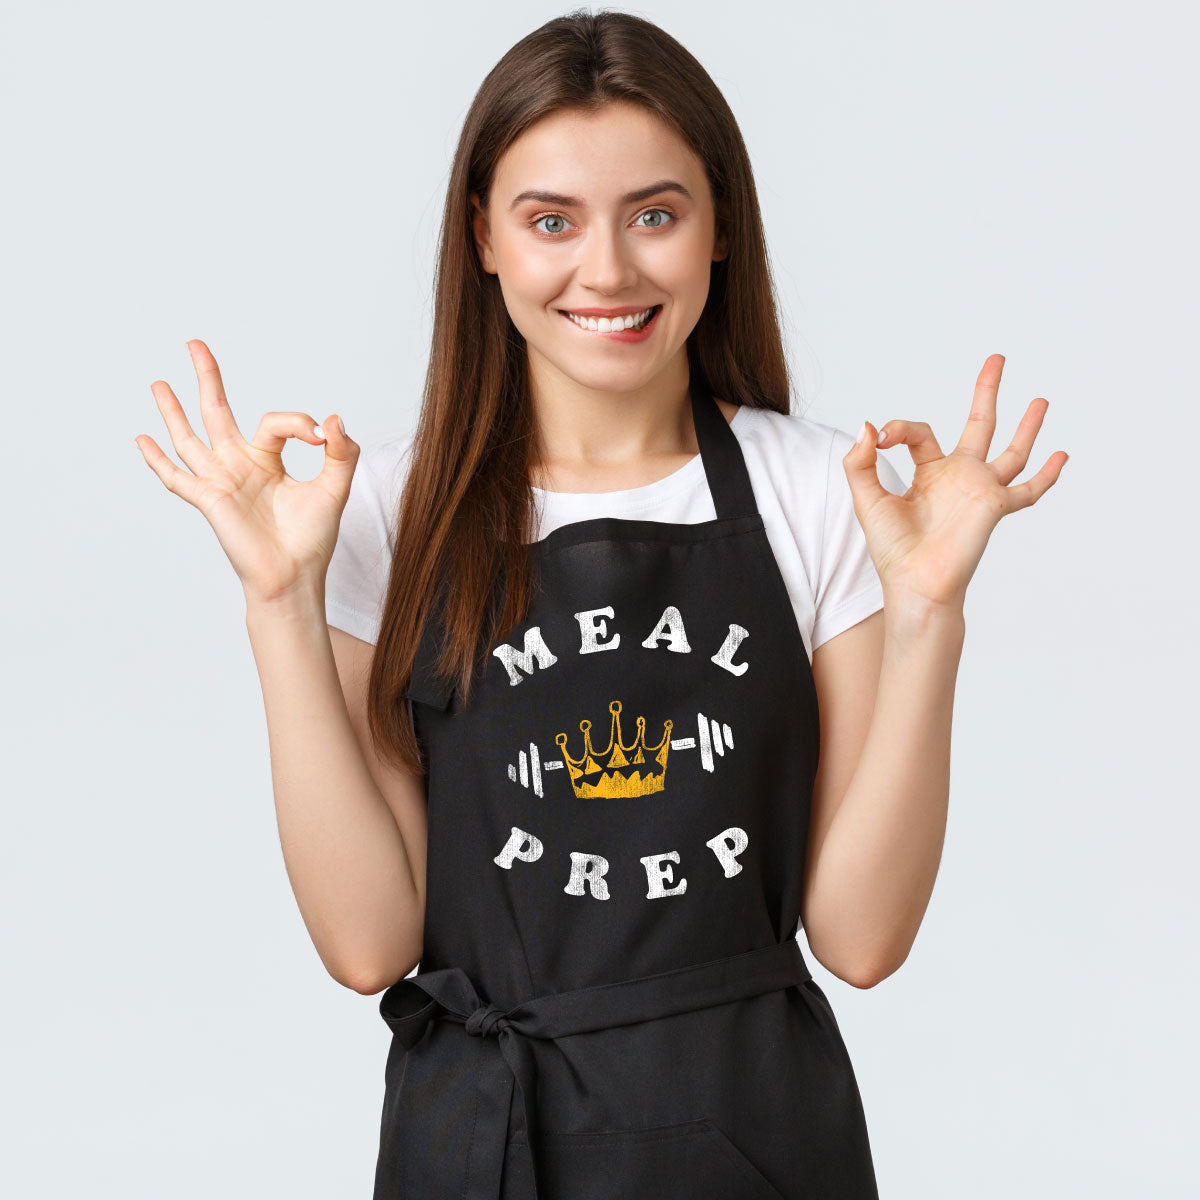 Meal Prep Queen Full-Length Apron with Pockets